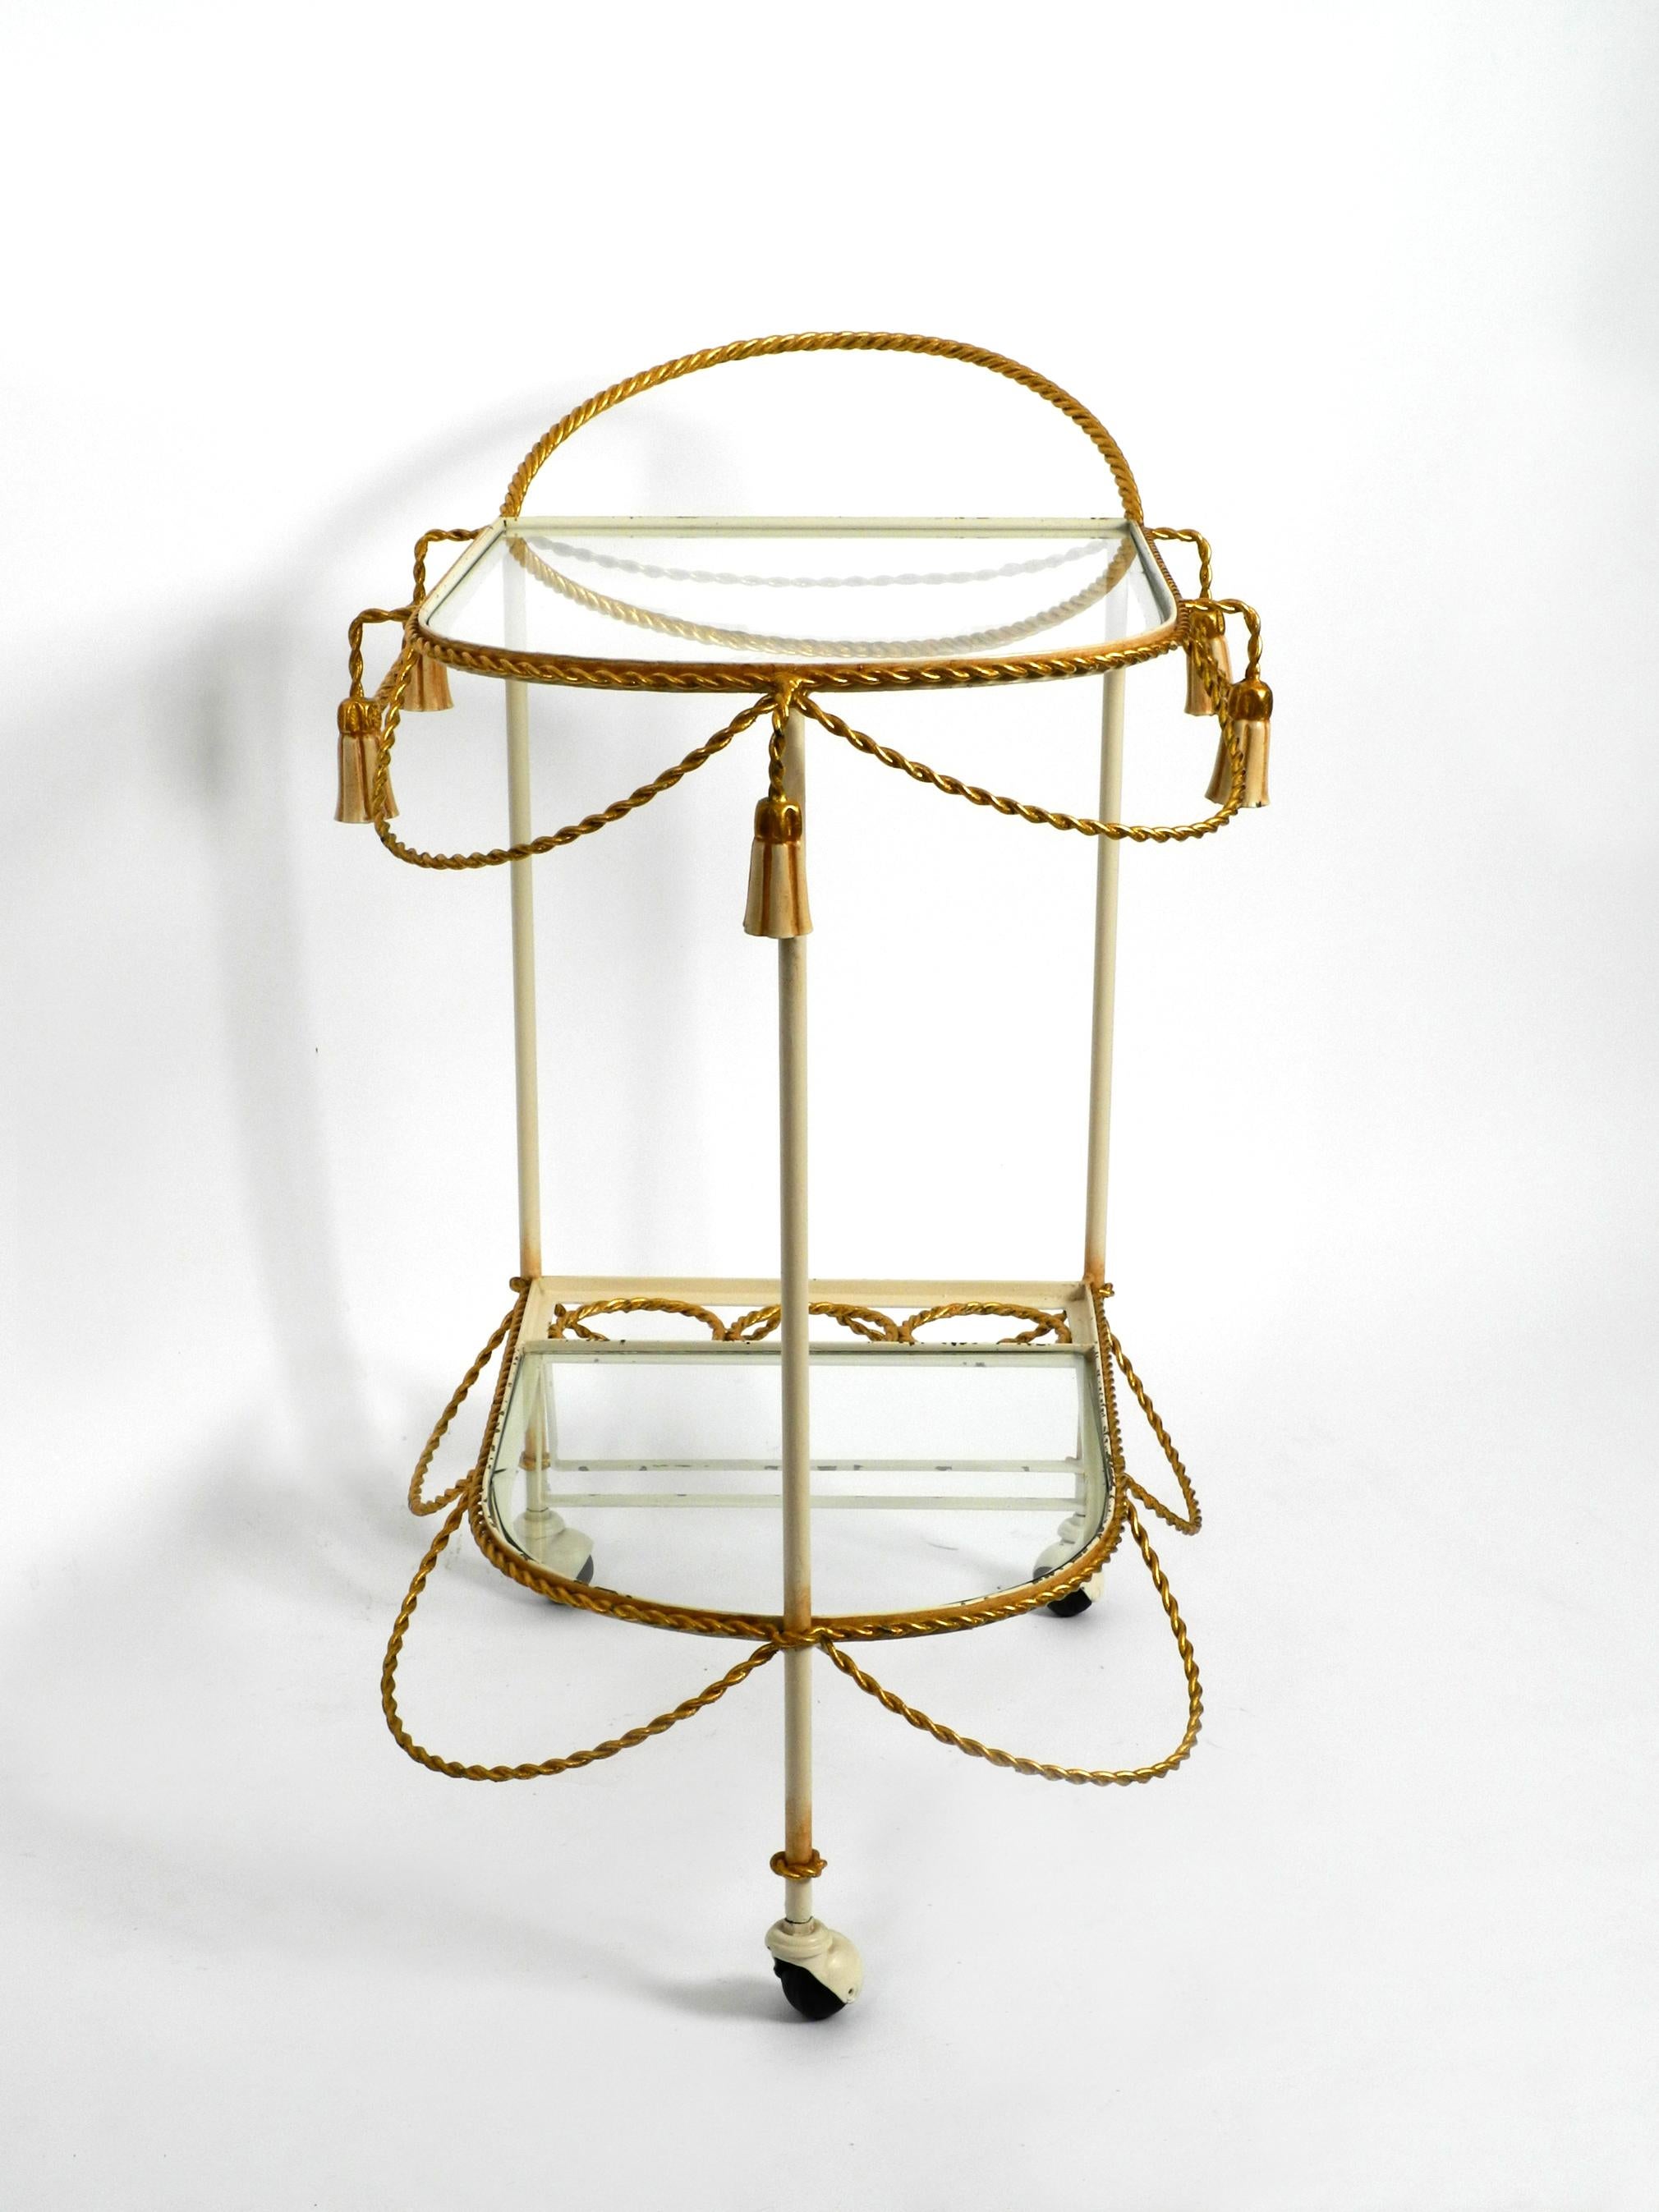 Italian Midcentury Bar Cart Made of Metal in Beige and Gold with Glass Elements For Sale 6